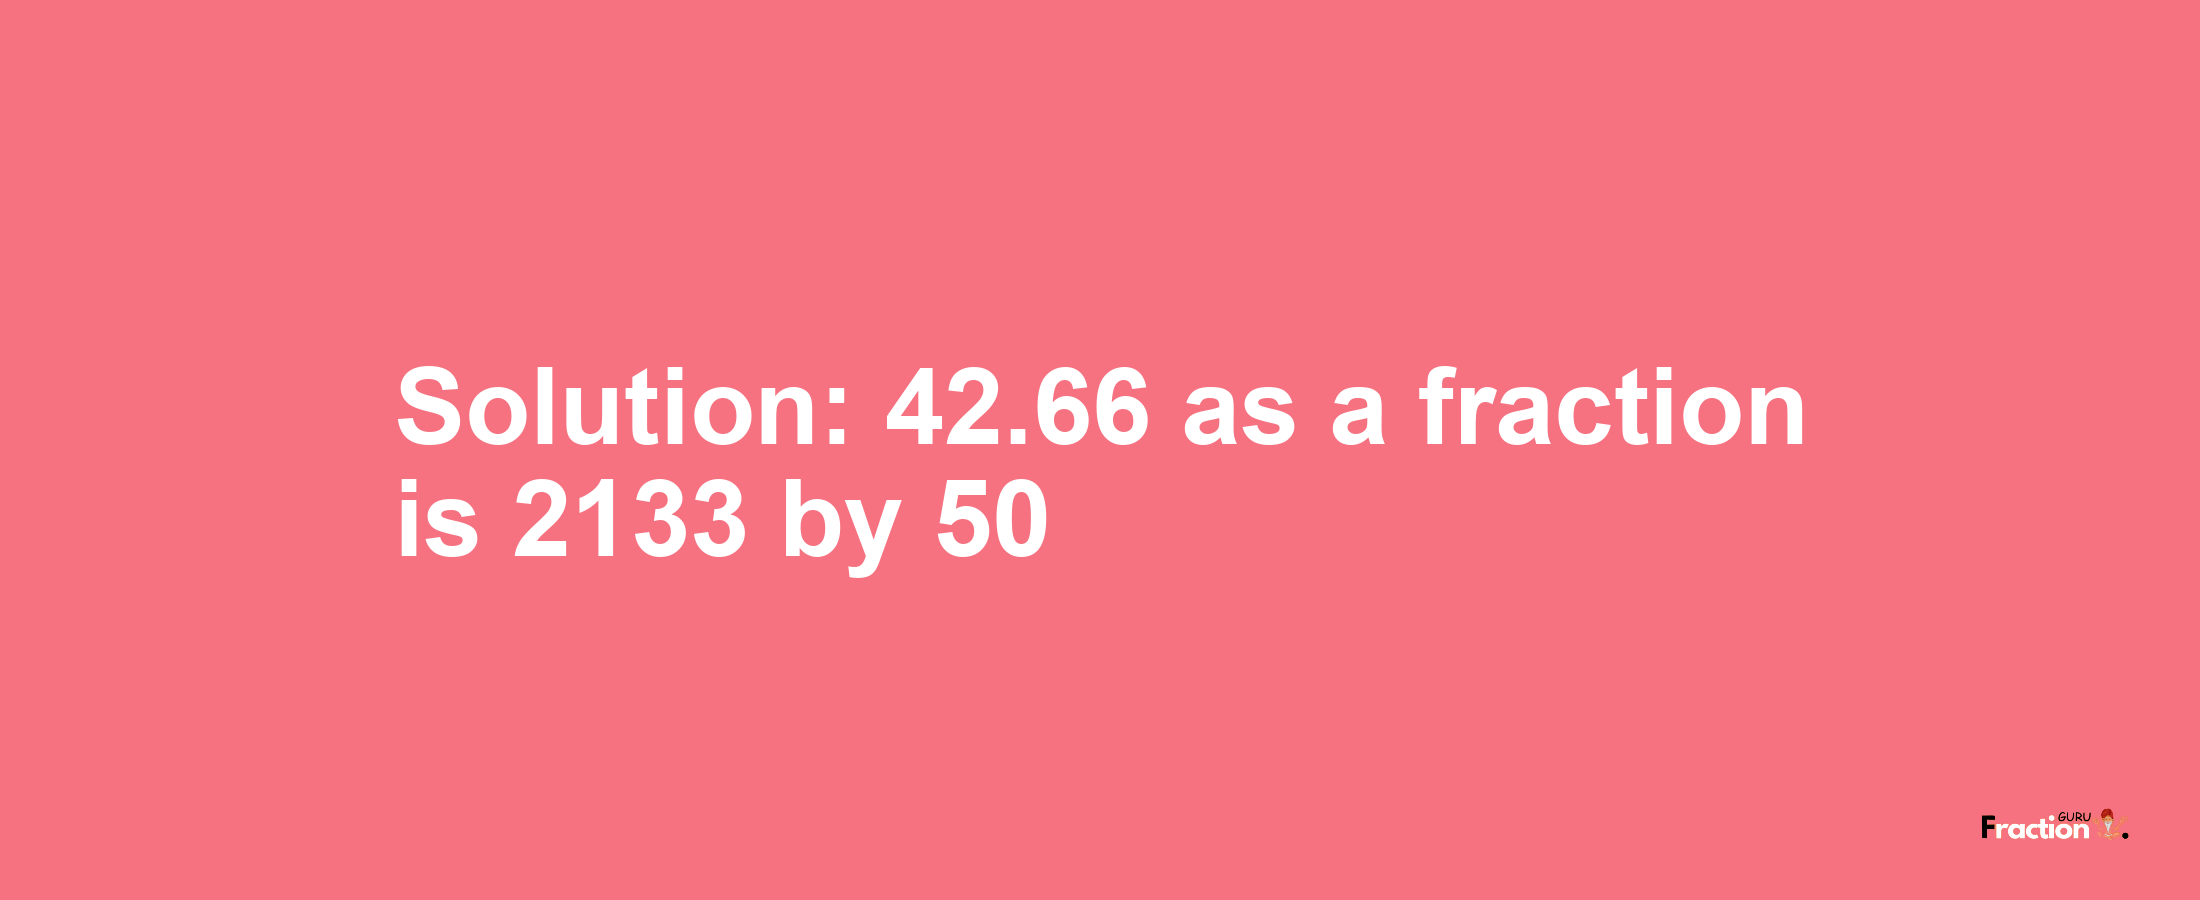 Solution:42.66 as a fraction is 2133/50